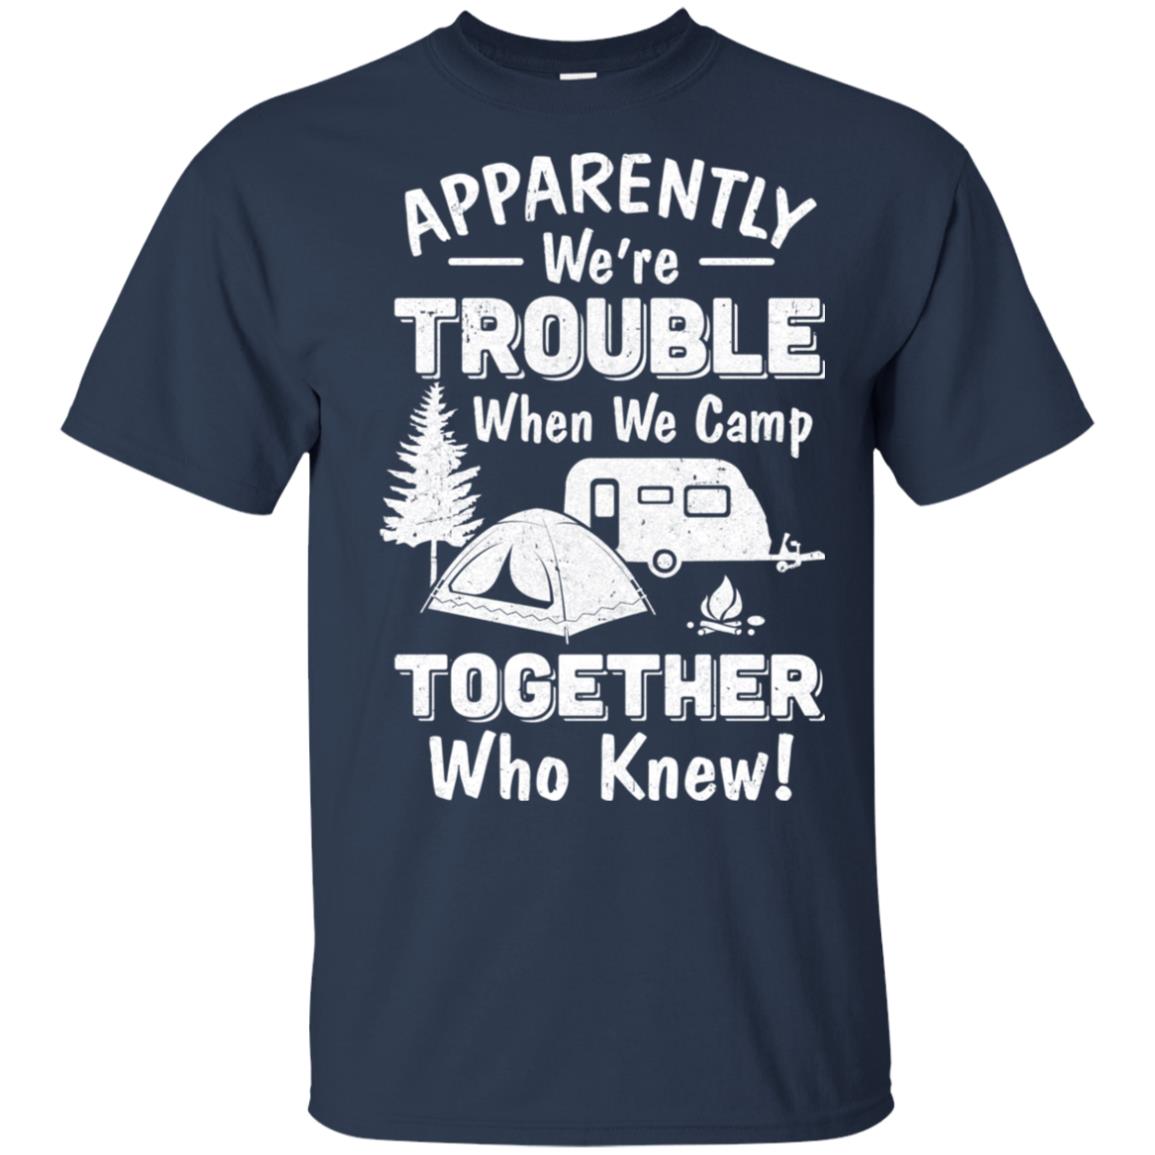 Apparently We're Trouble When We Camp Together Shirt & Hoodie ...